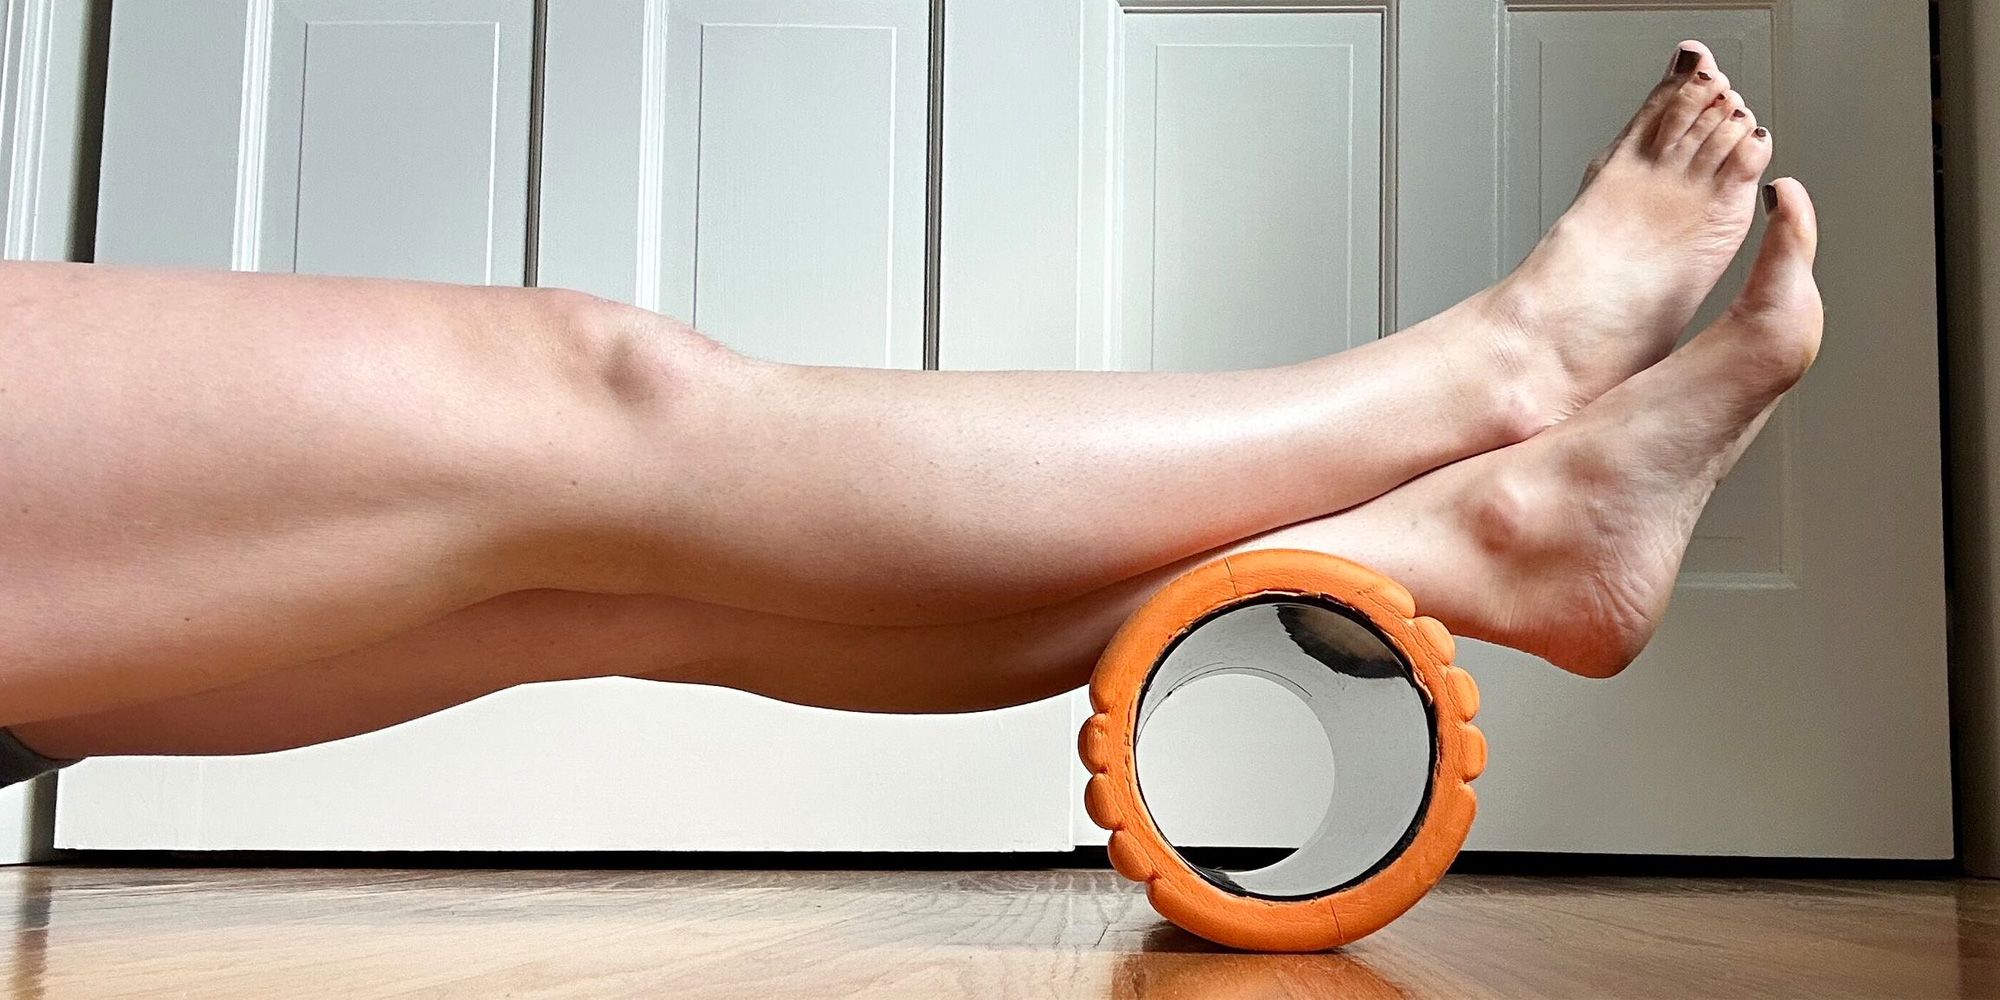 12 Tips on How to Foam Roll Effectively - Purpose of Foam Roller